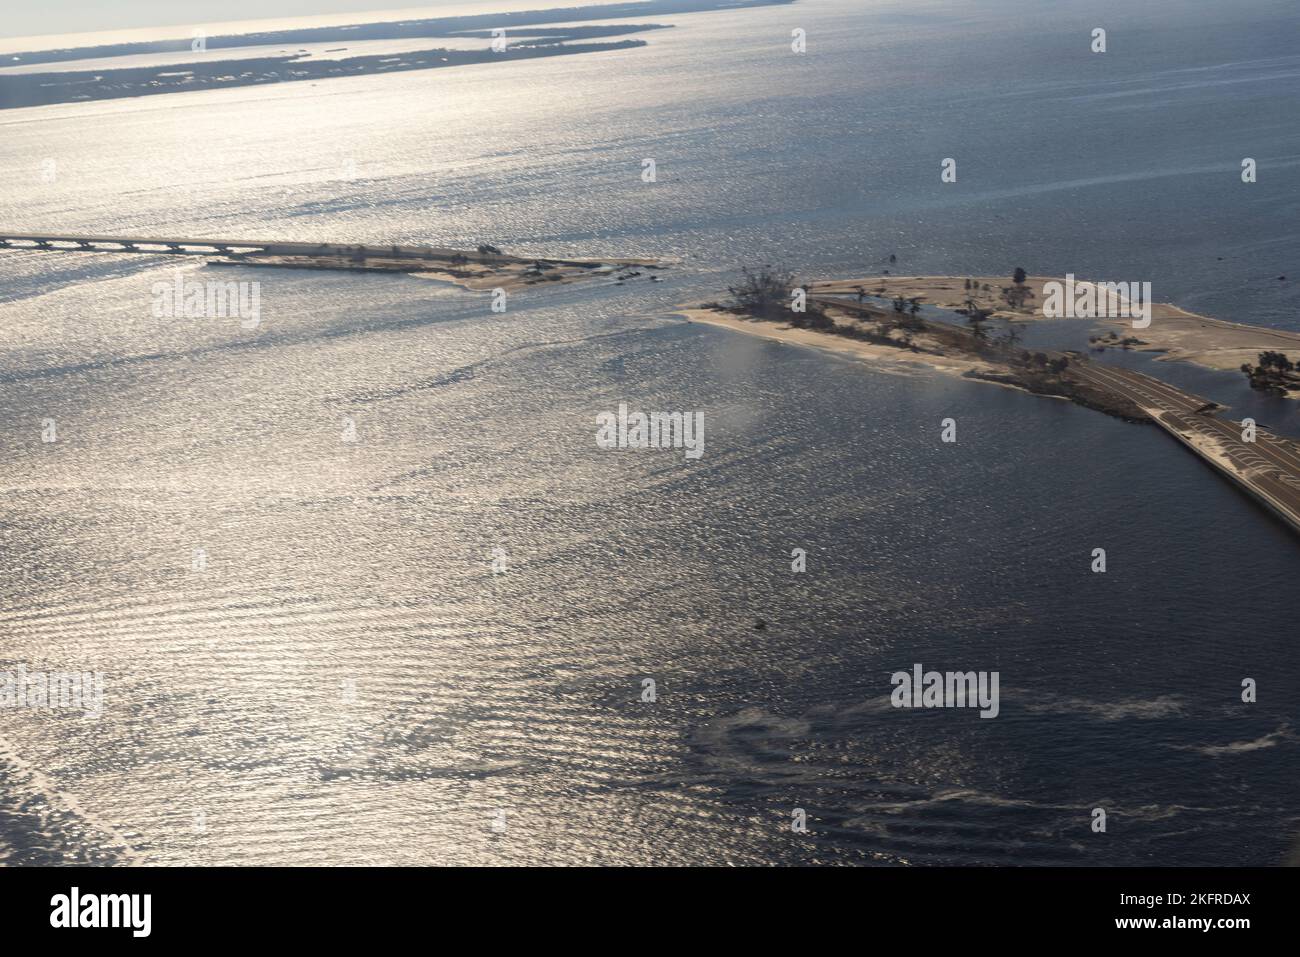 Aerial shot showing damage caused by Hurricane Ian to the Sanibel Causeway near Cape Coral, Florida, October 3, 2022.  The causeway, which is temporarily closed, is the only land-travel access road between Sanibel Island and mainland Florida. Stock Photo